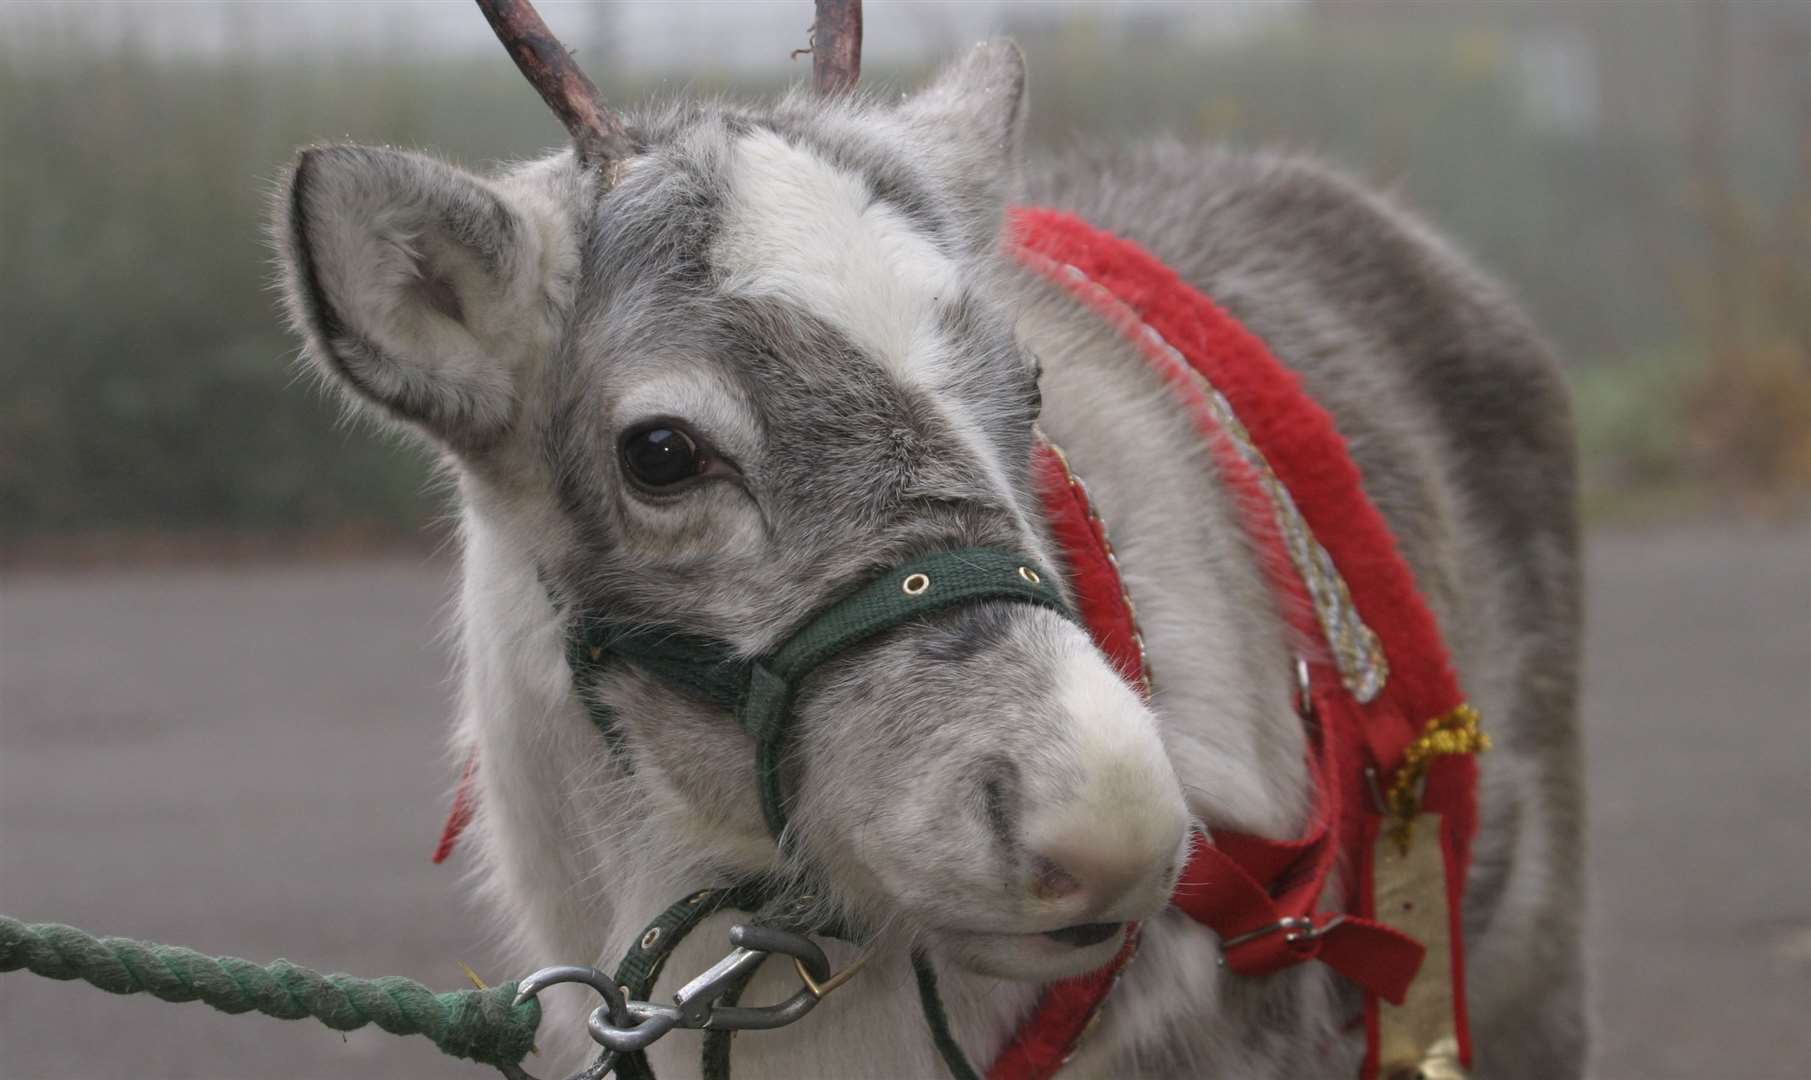 The Reindeer Centre will have Santa